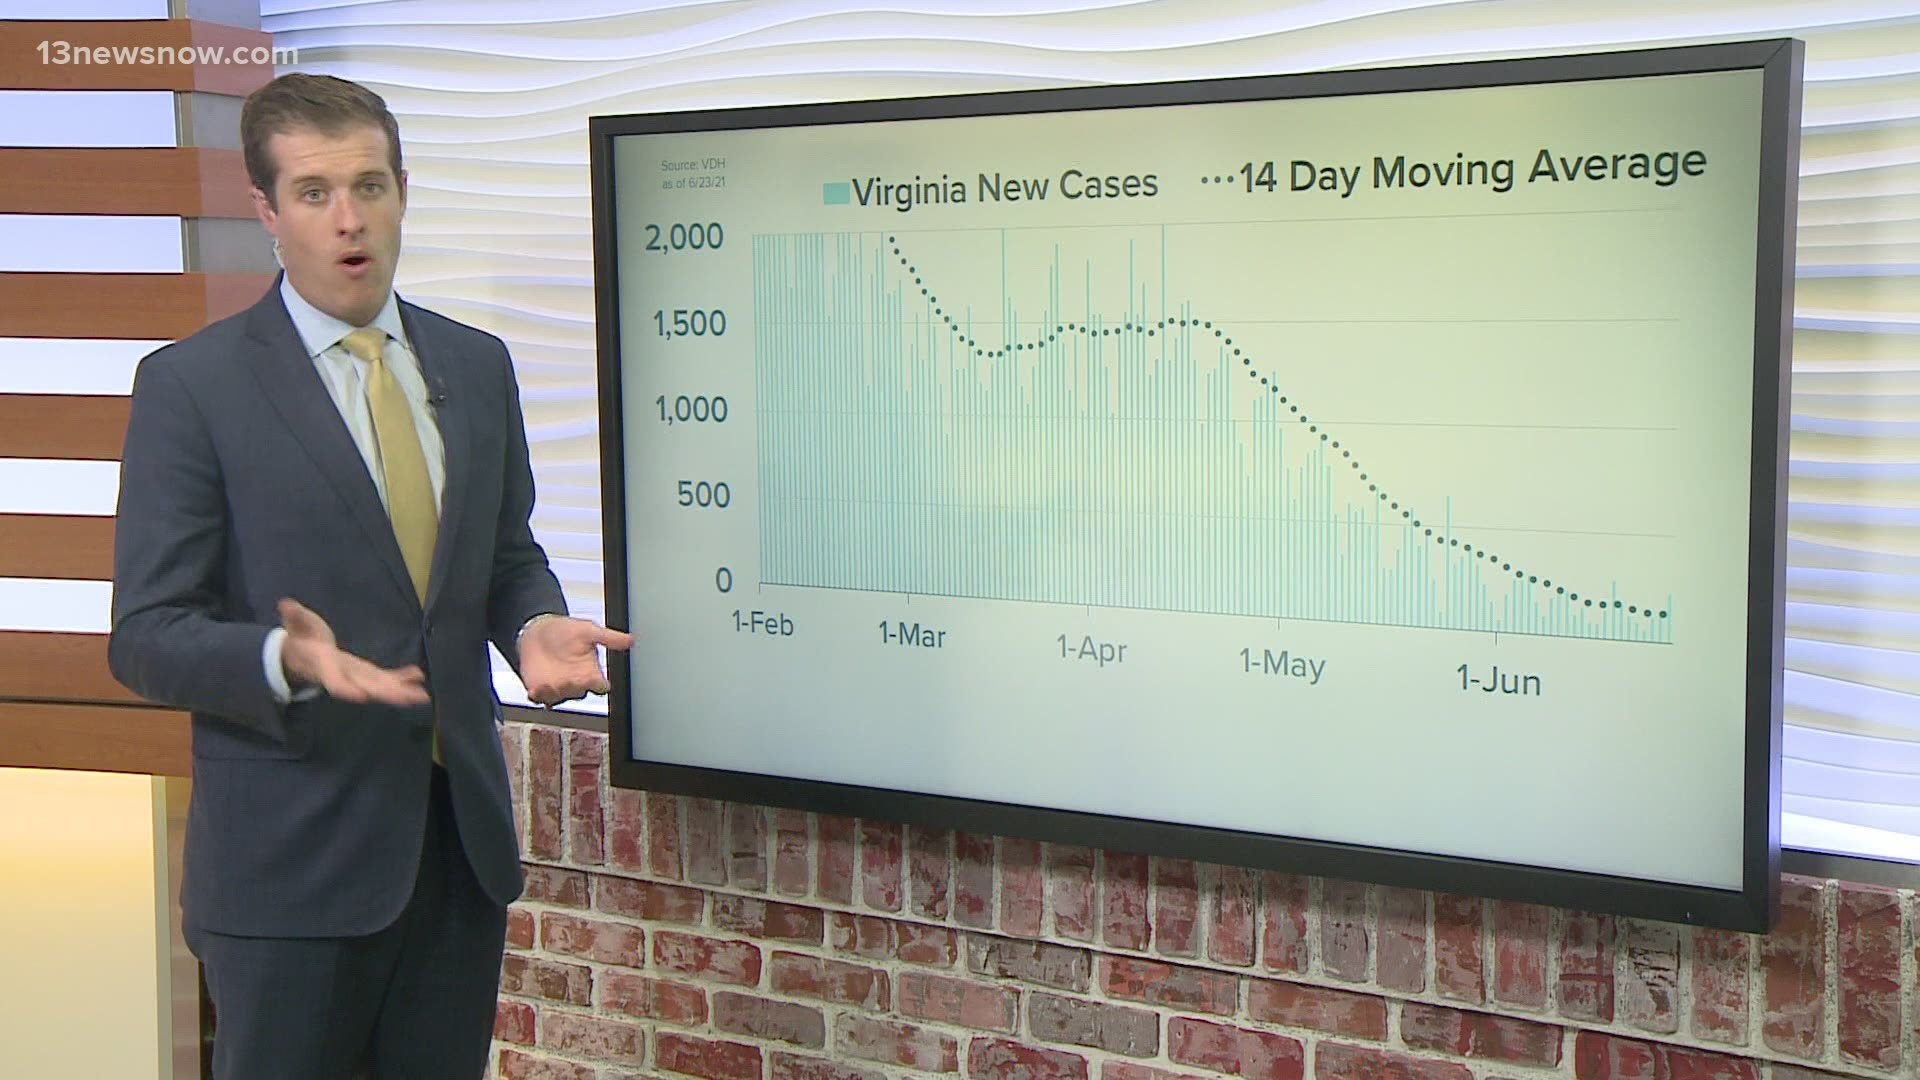 13News Now anchor Dan Kennedy tracks trends using data from the Virginia Department of Health. Virginia Beach cases are trending up.